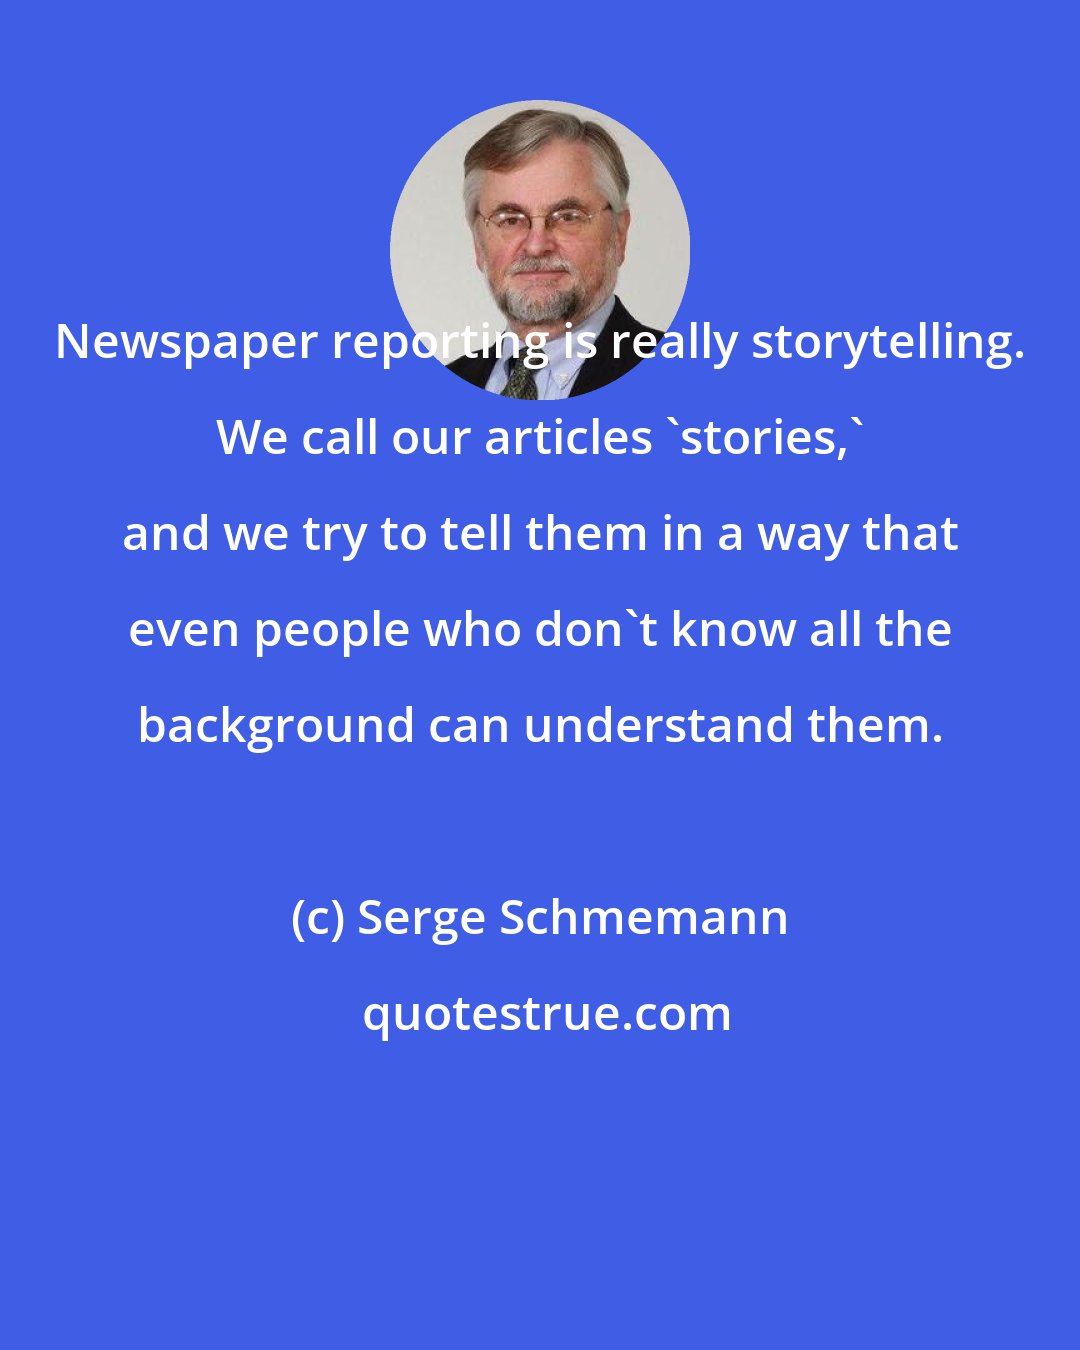 Serge Schmemann: Newspaper reporting is really storytelling. We call our articles 'stories,' and we try to tell them in a way that even people who don't know all the background can understand them.